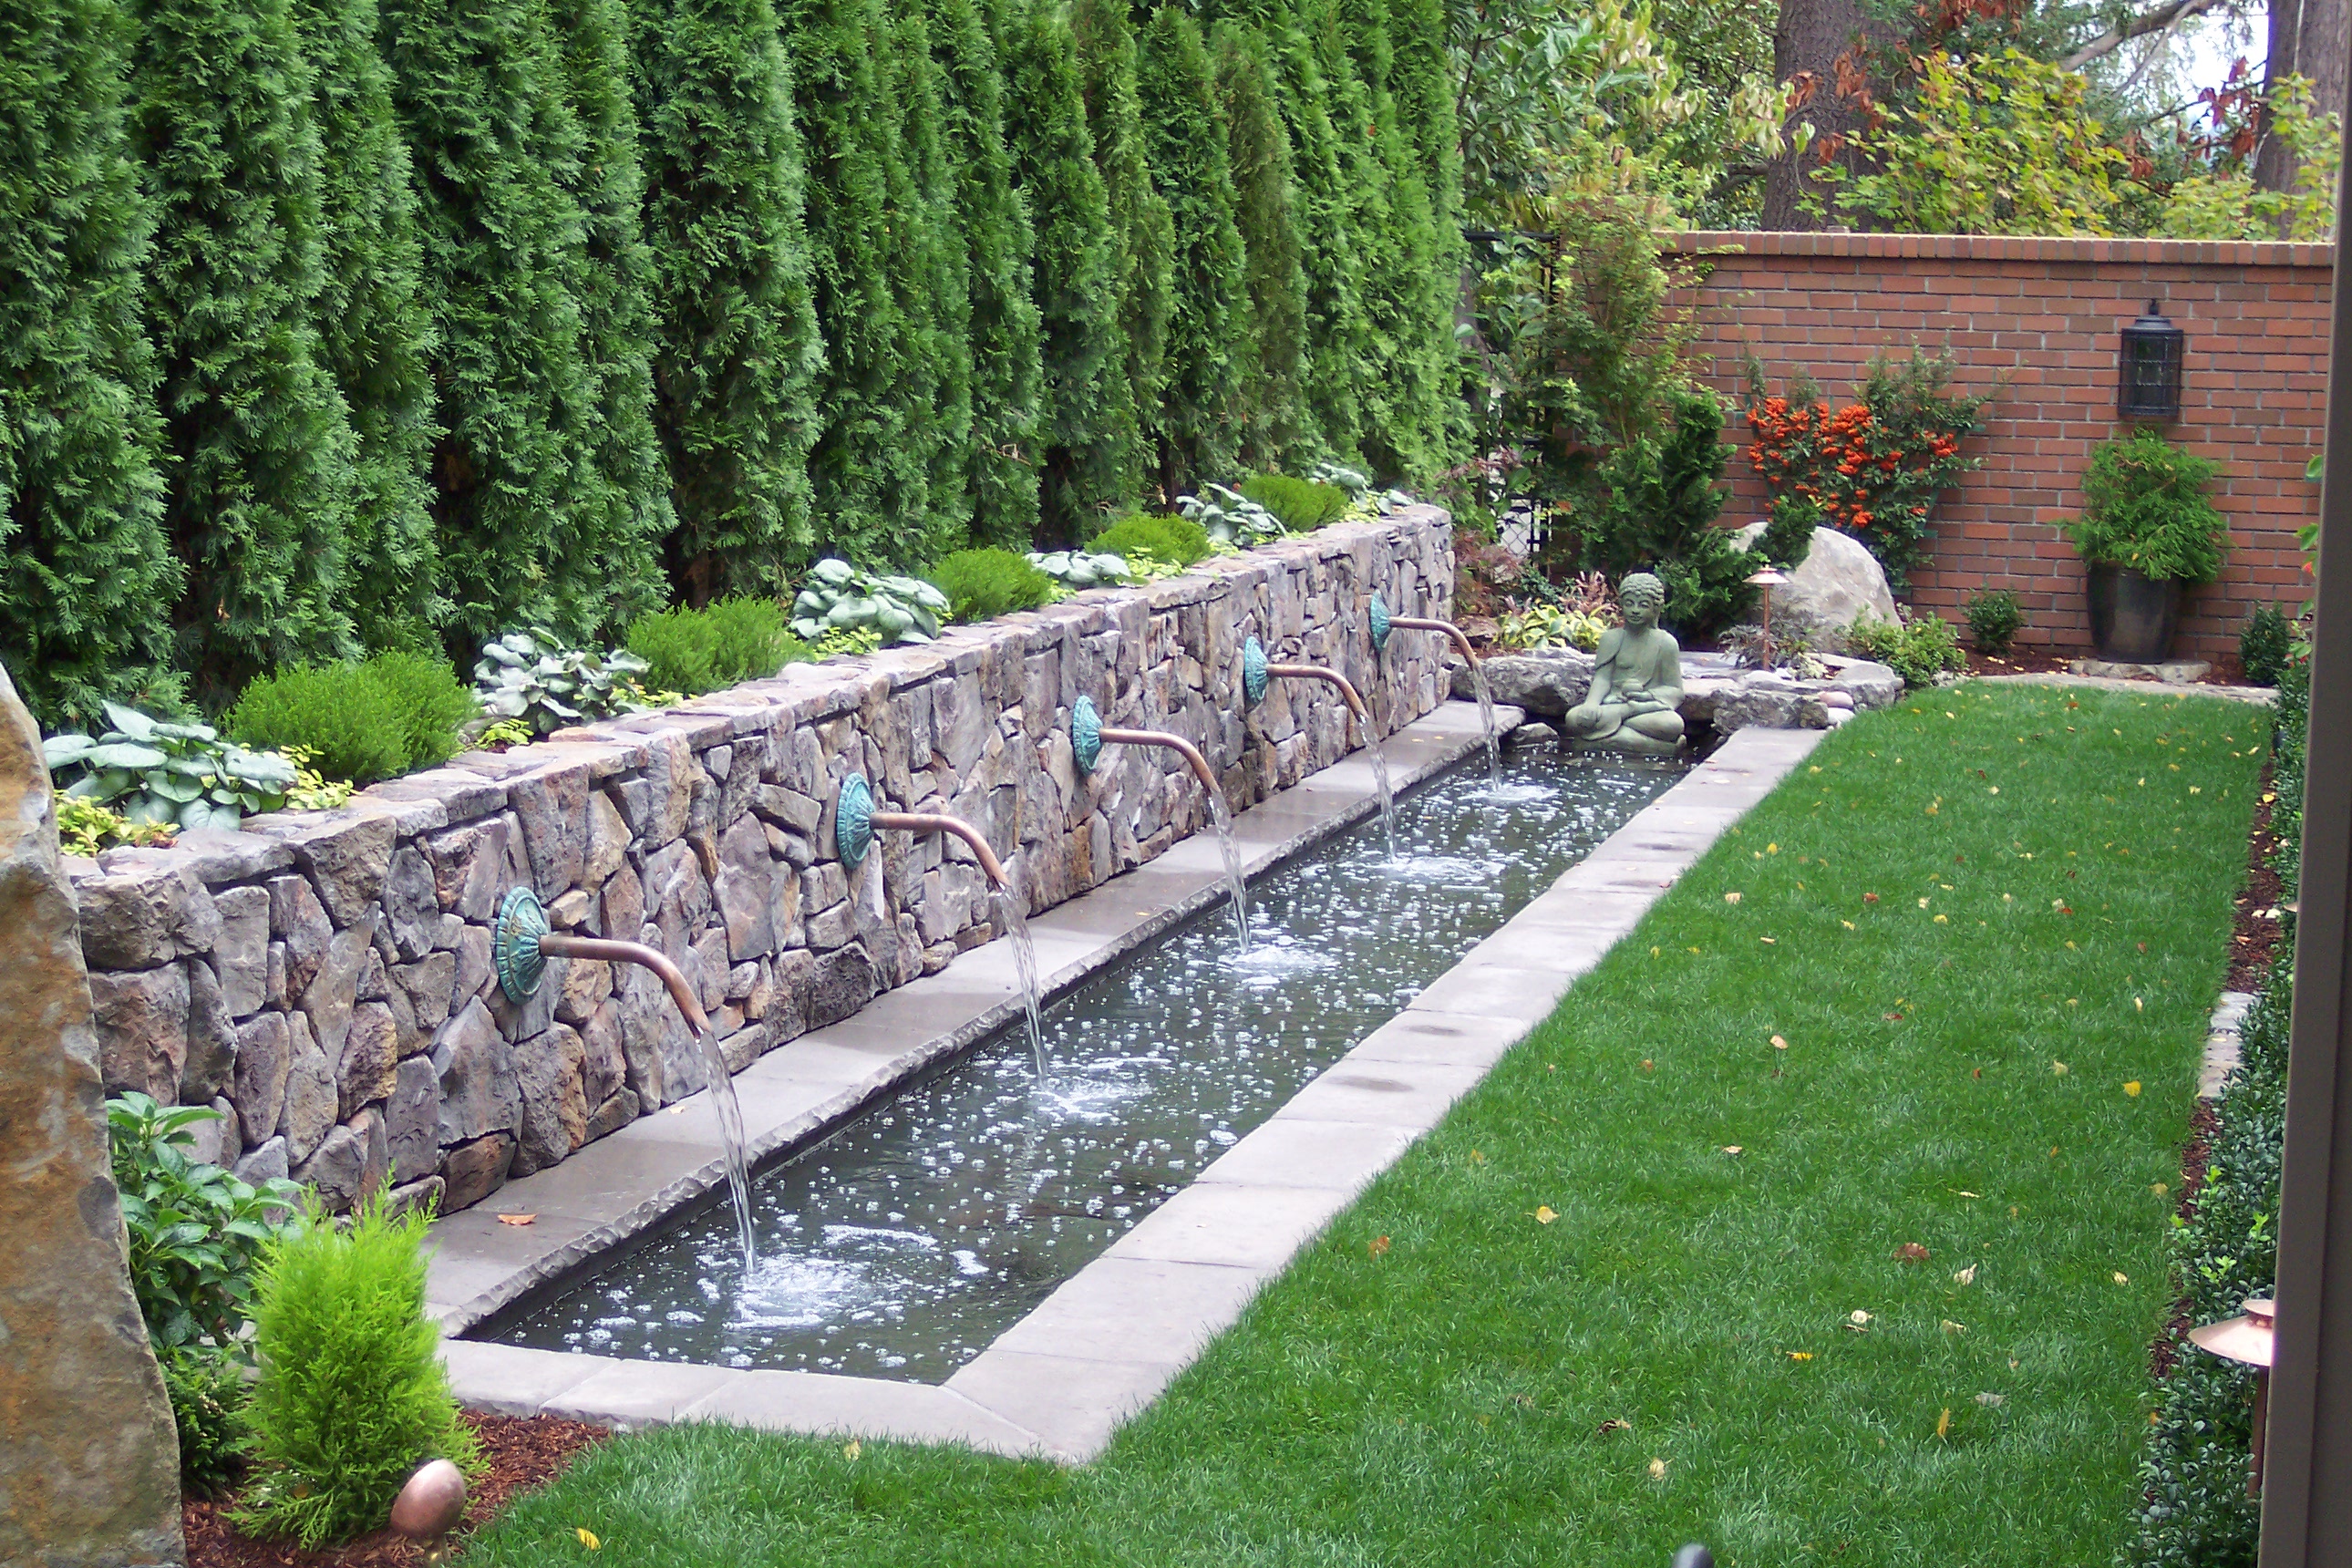 Garden Design With Water Uamp Architecture On Pinterest Water Fountains Water With How To Plant